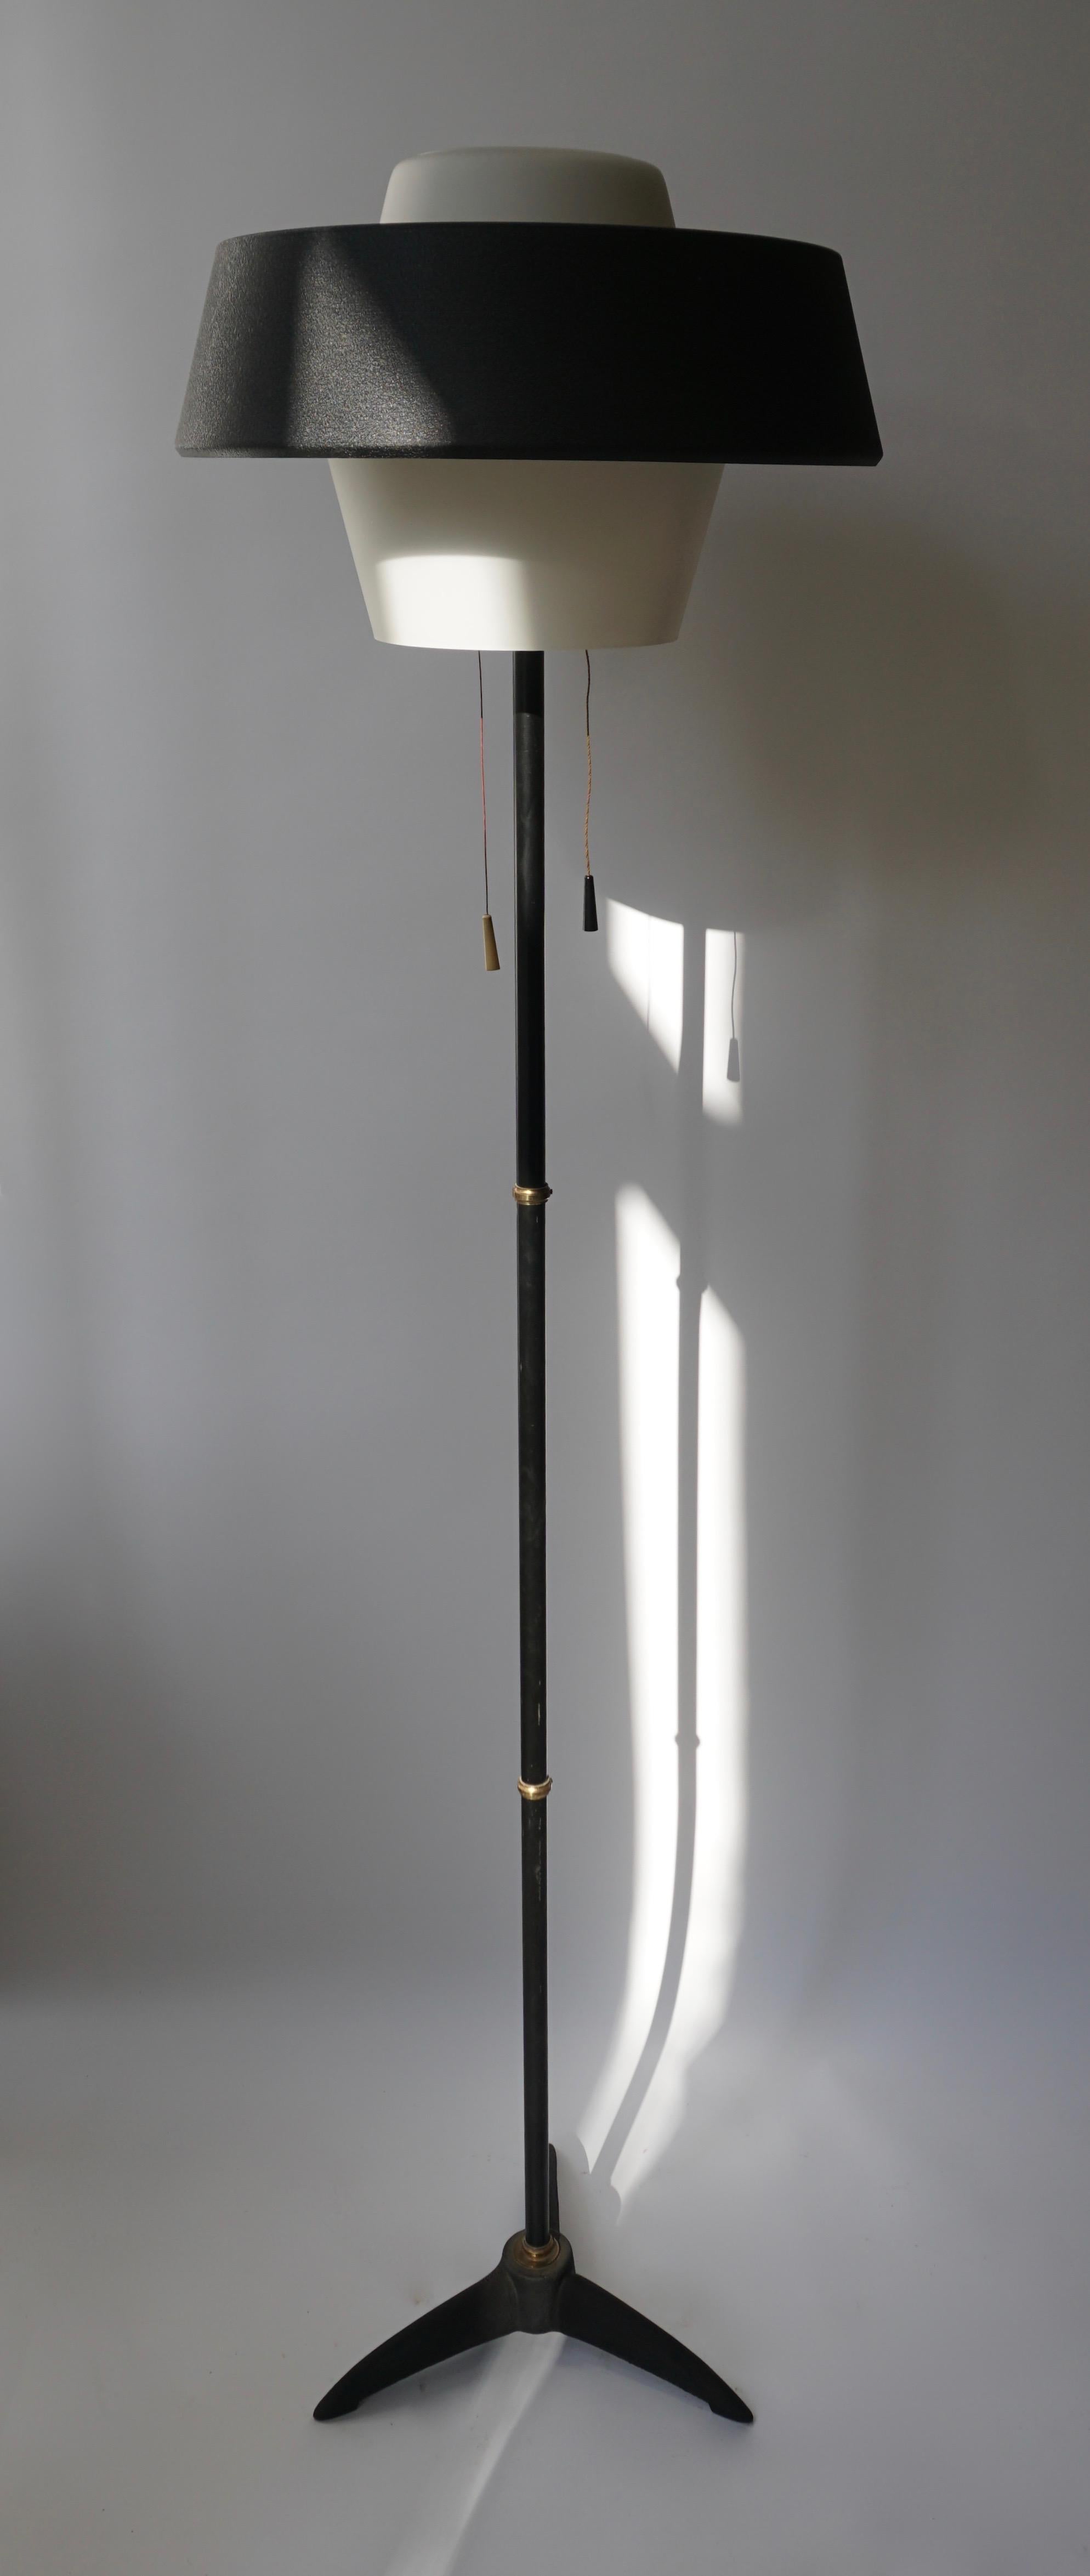 Louis Kalff 1950s floor lamp produced by Philips Eindhoven, The Netherlands.The hint of an exotic African motif and topped with an opaline glass shade head' surrounded by a black hood.

Louis Kalff NX 109 Floor Lamp

Materials: Black cast iron